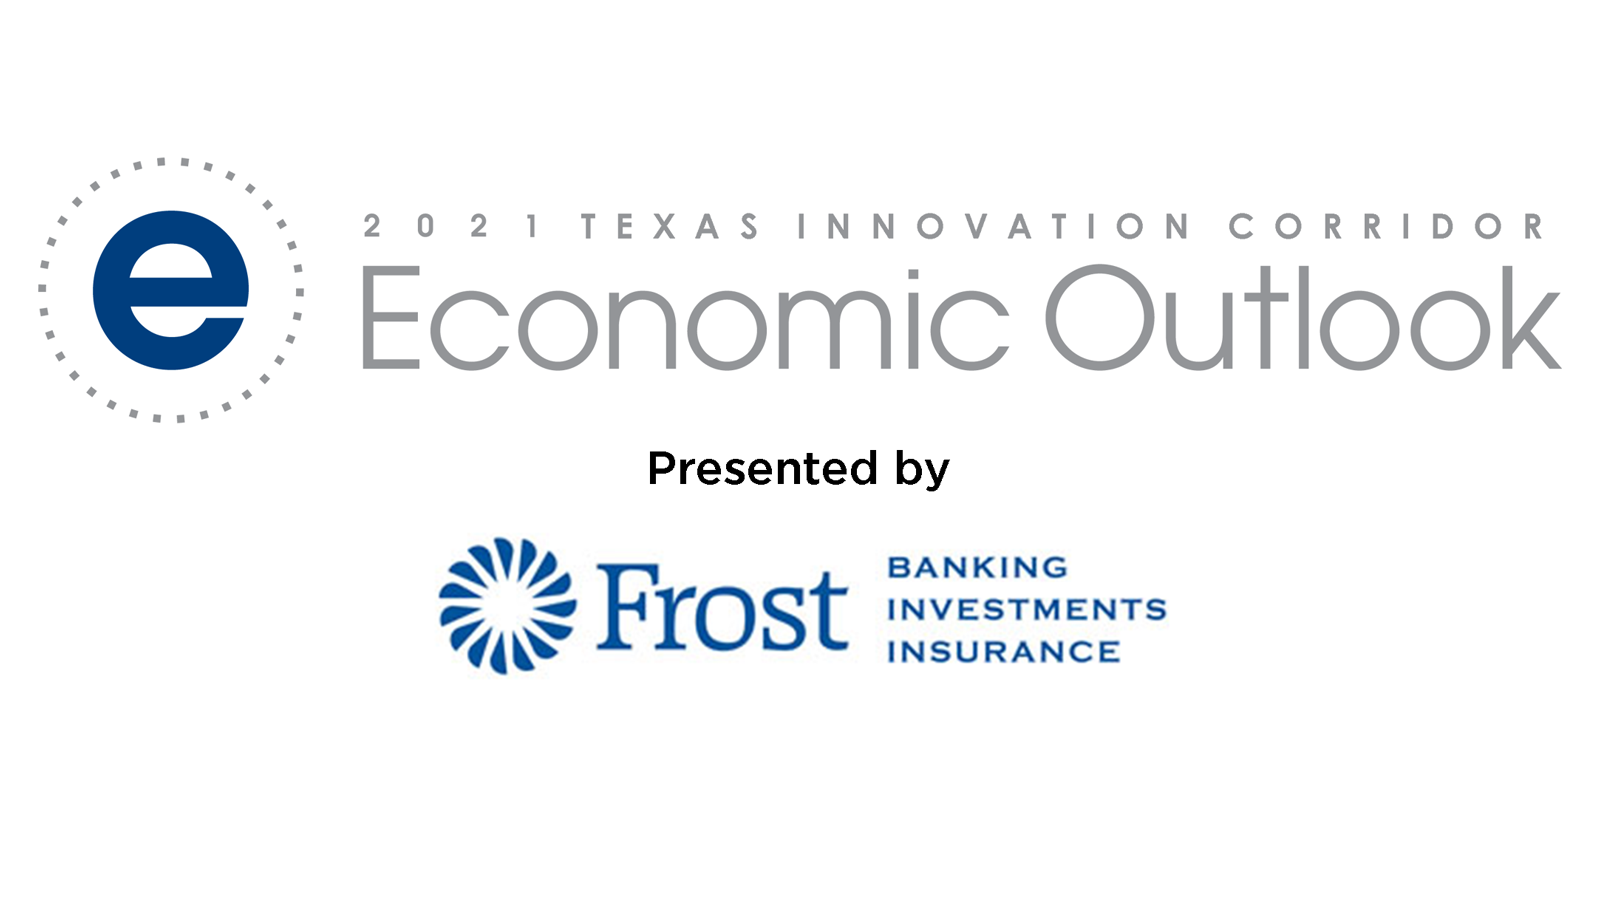 Economic-Outlook-Eventbrite-Header-with-Frost-logo-copy-16x9.png